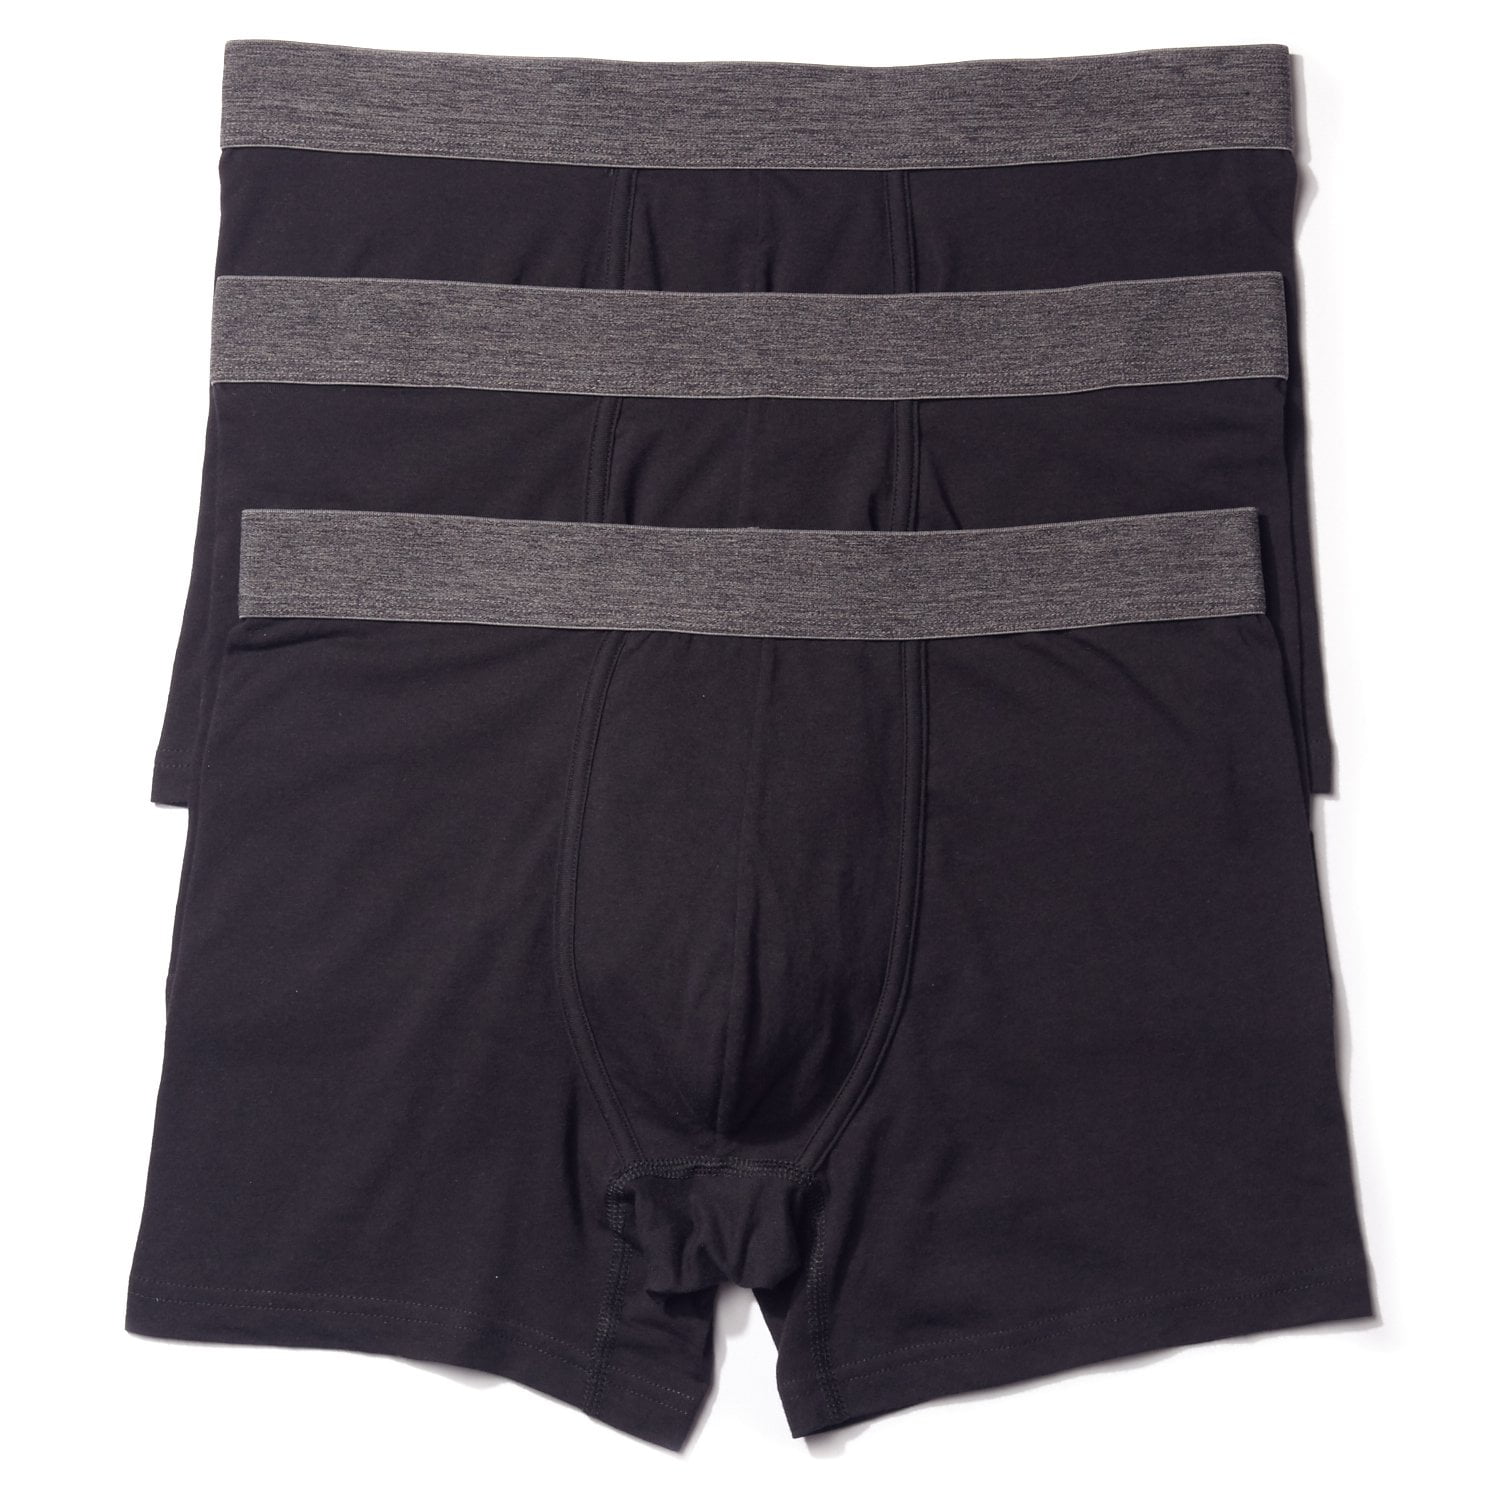 Basic Outfitter's Mens Black Boxer Brief 3 Pack - Walmart.com